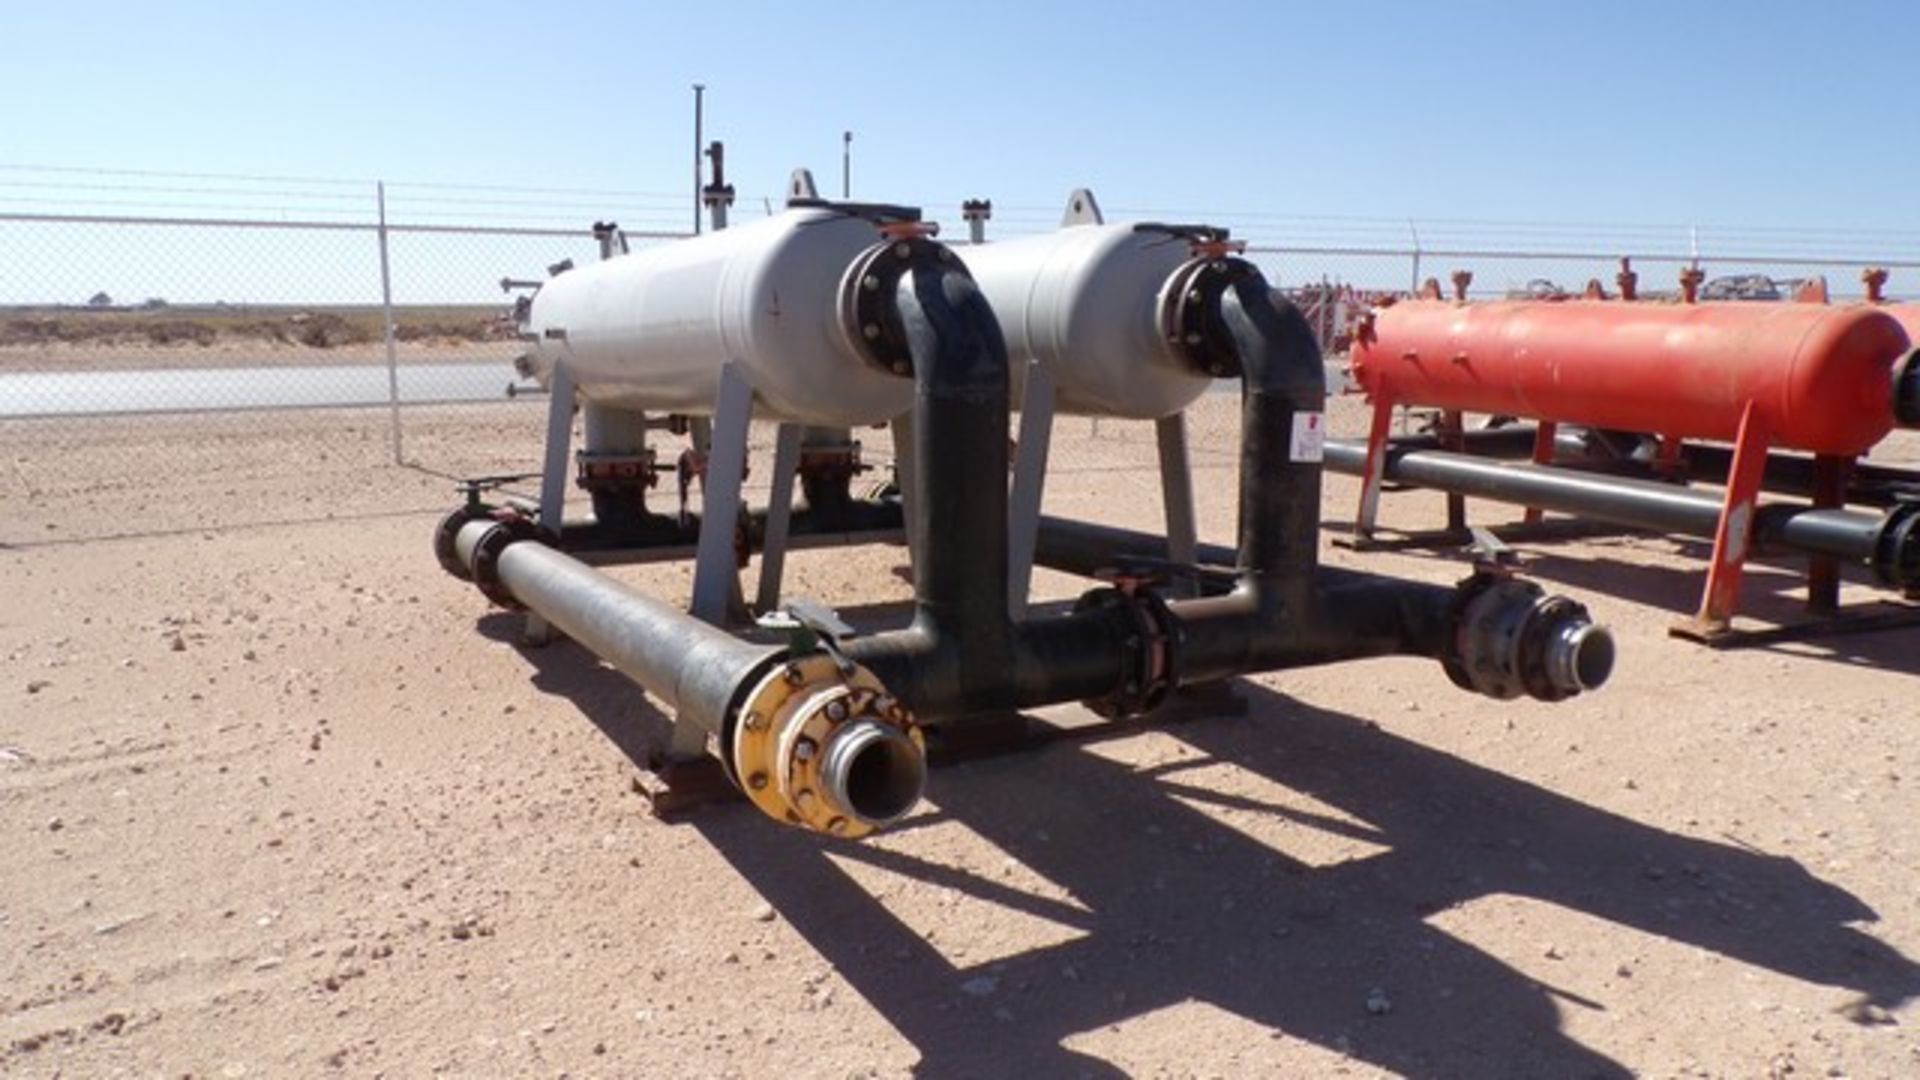 Located in YARD 1 - Midland, TX (1942) 24" X 10' FILER POD CANISTERS W/ 8" PIPE VALVES